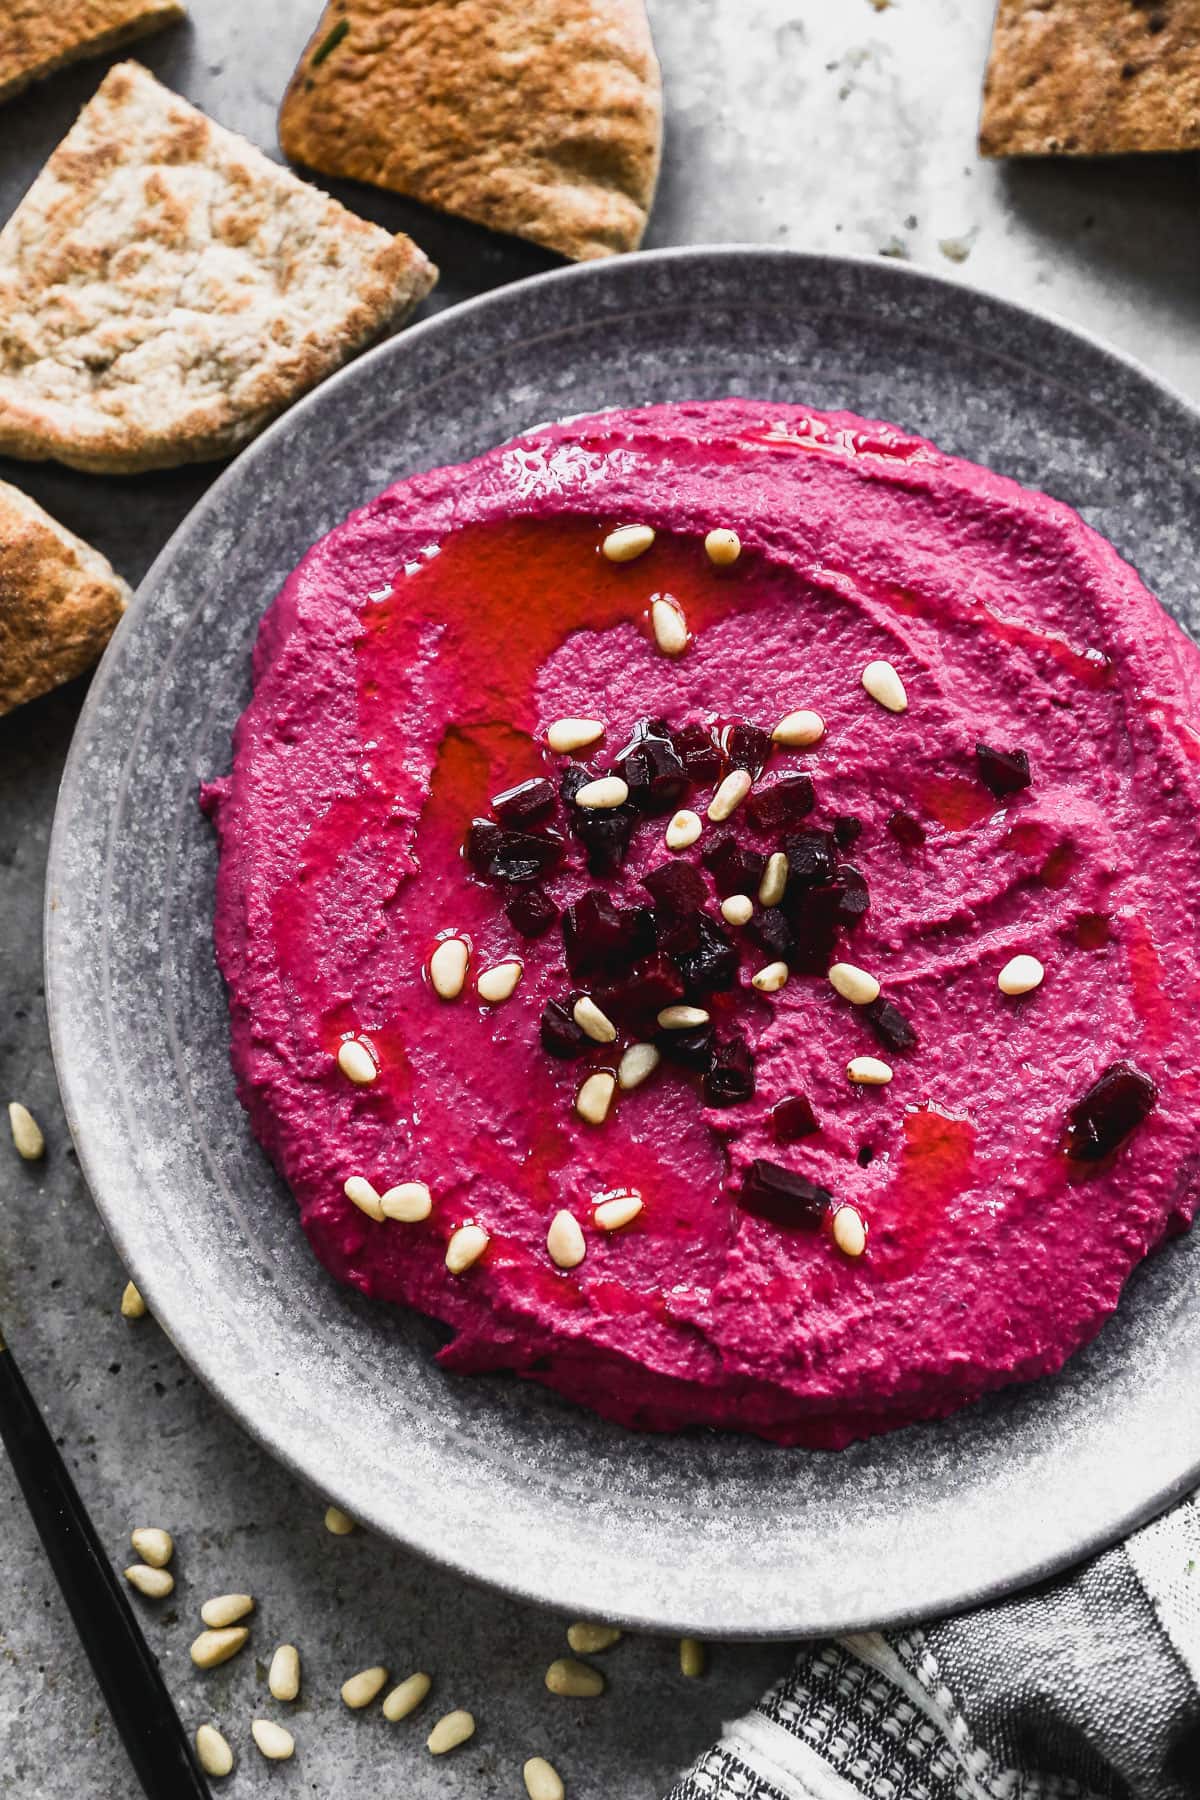 The Beetroot Hummus: A Delight for the Eyes and Taste Buds